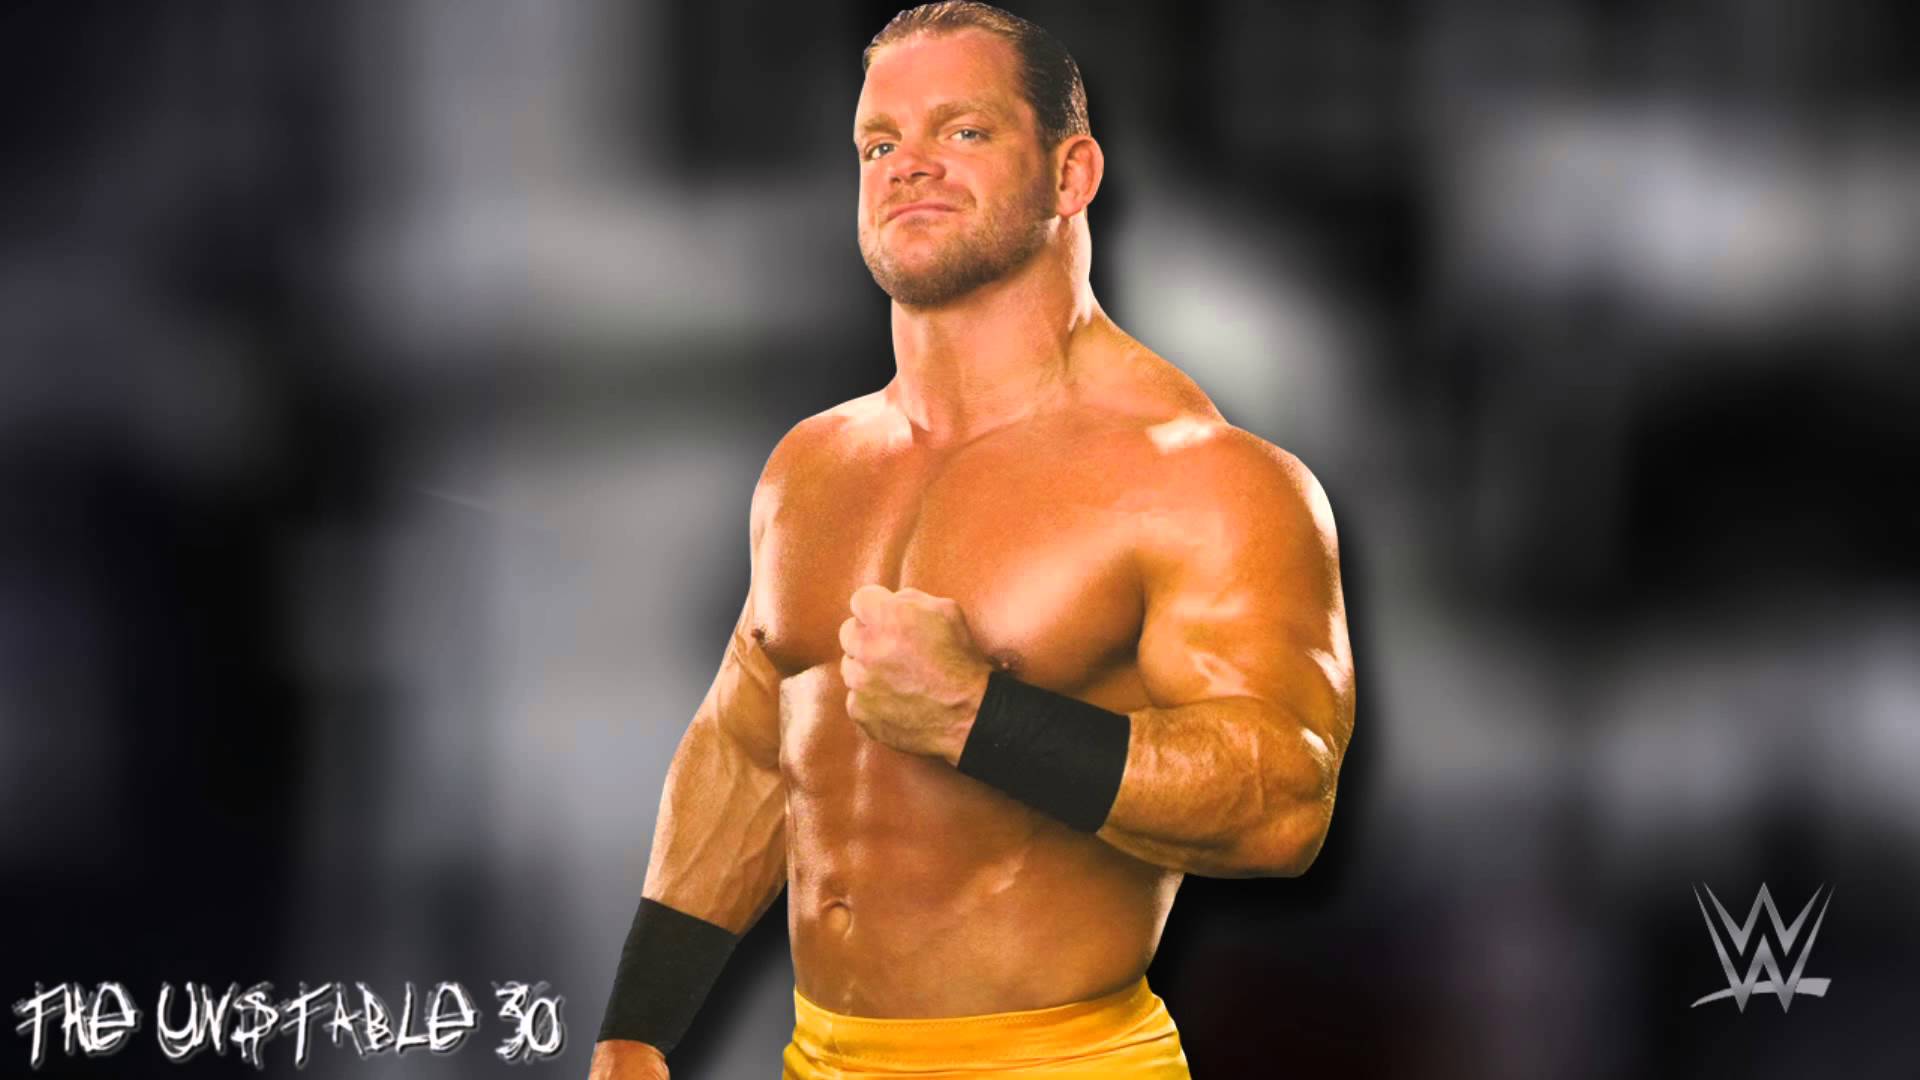 Chris Benoit 5th WWE Theme Song For 30 minutes Edit